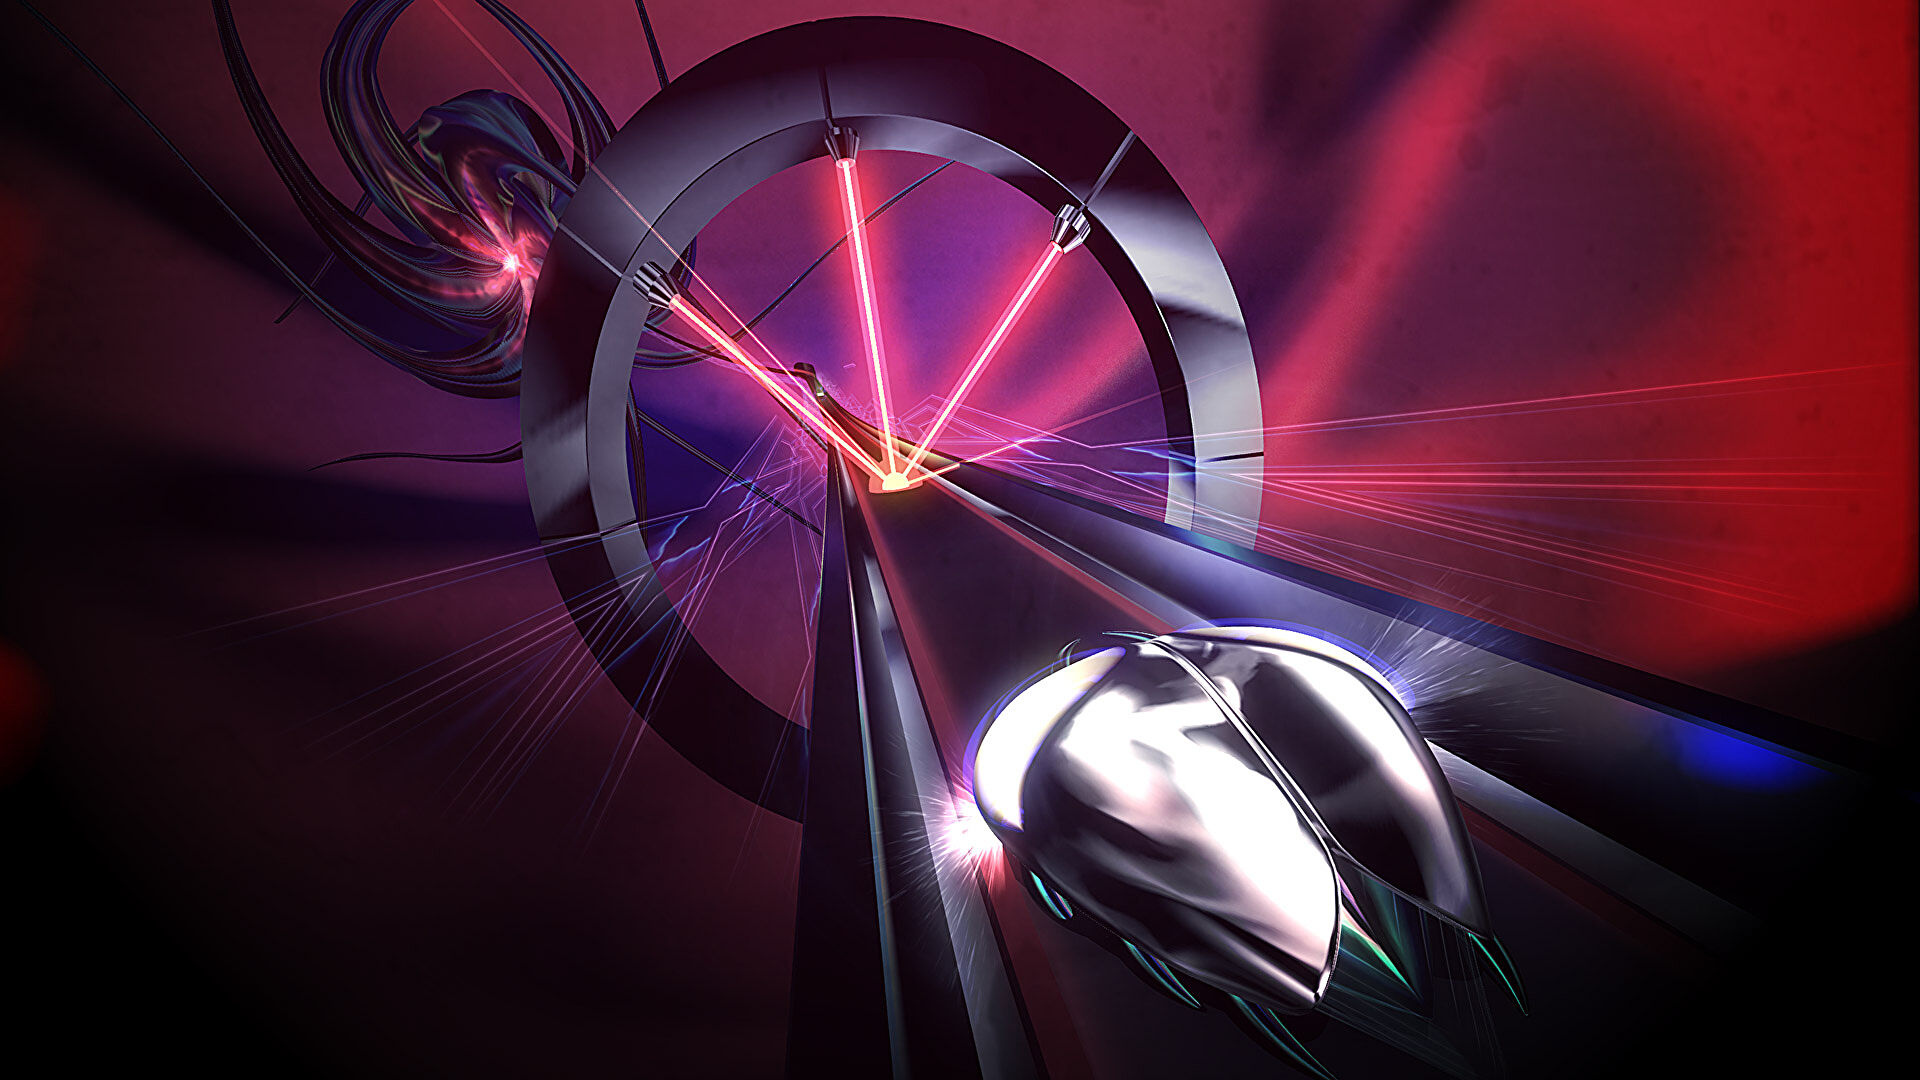 Have you played... Thumper?